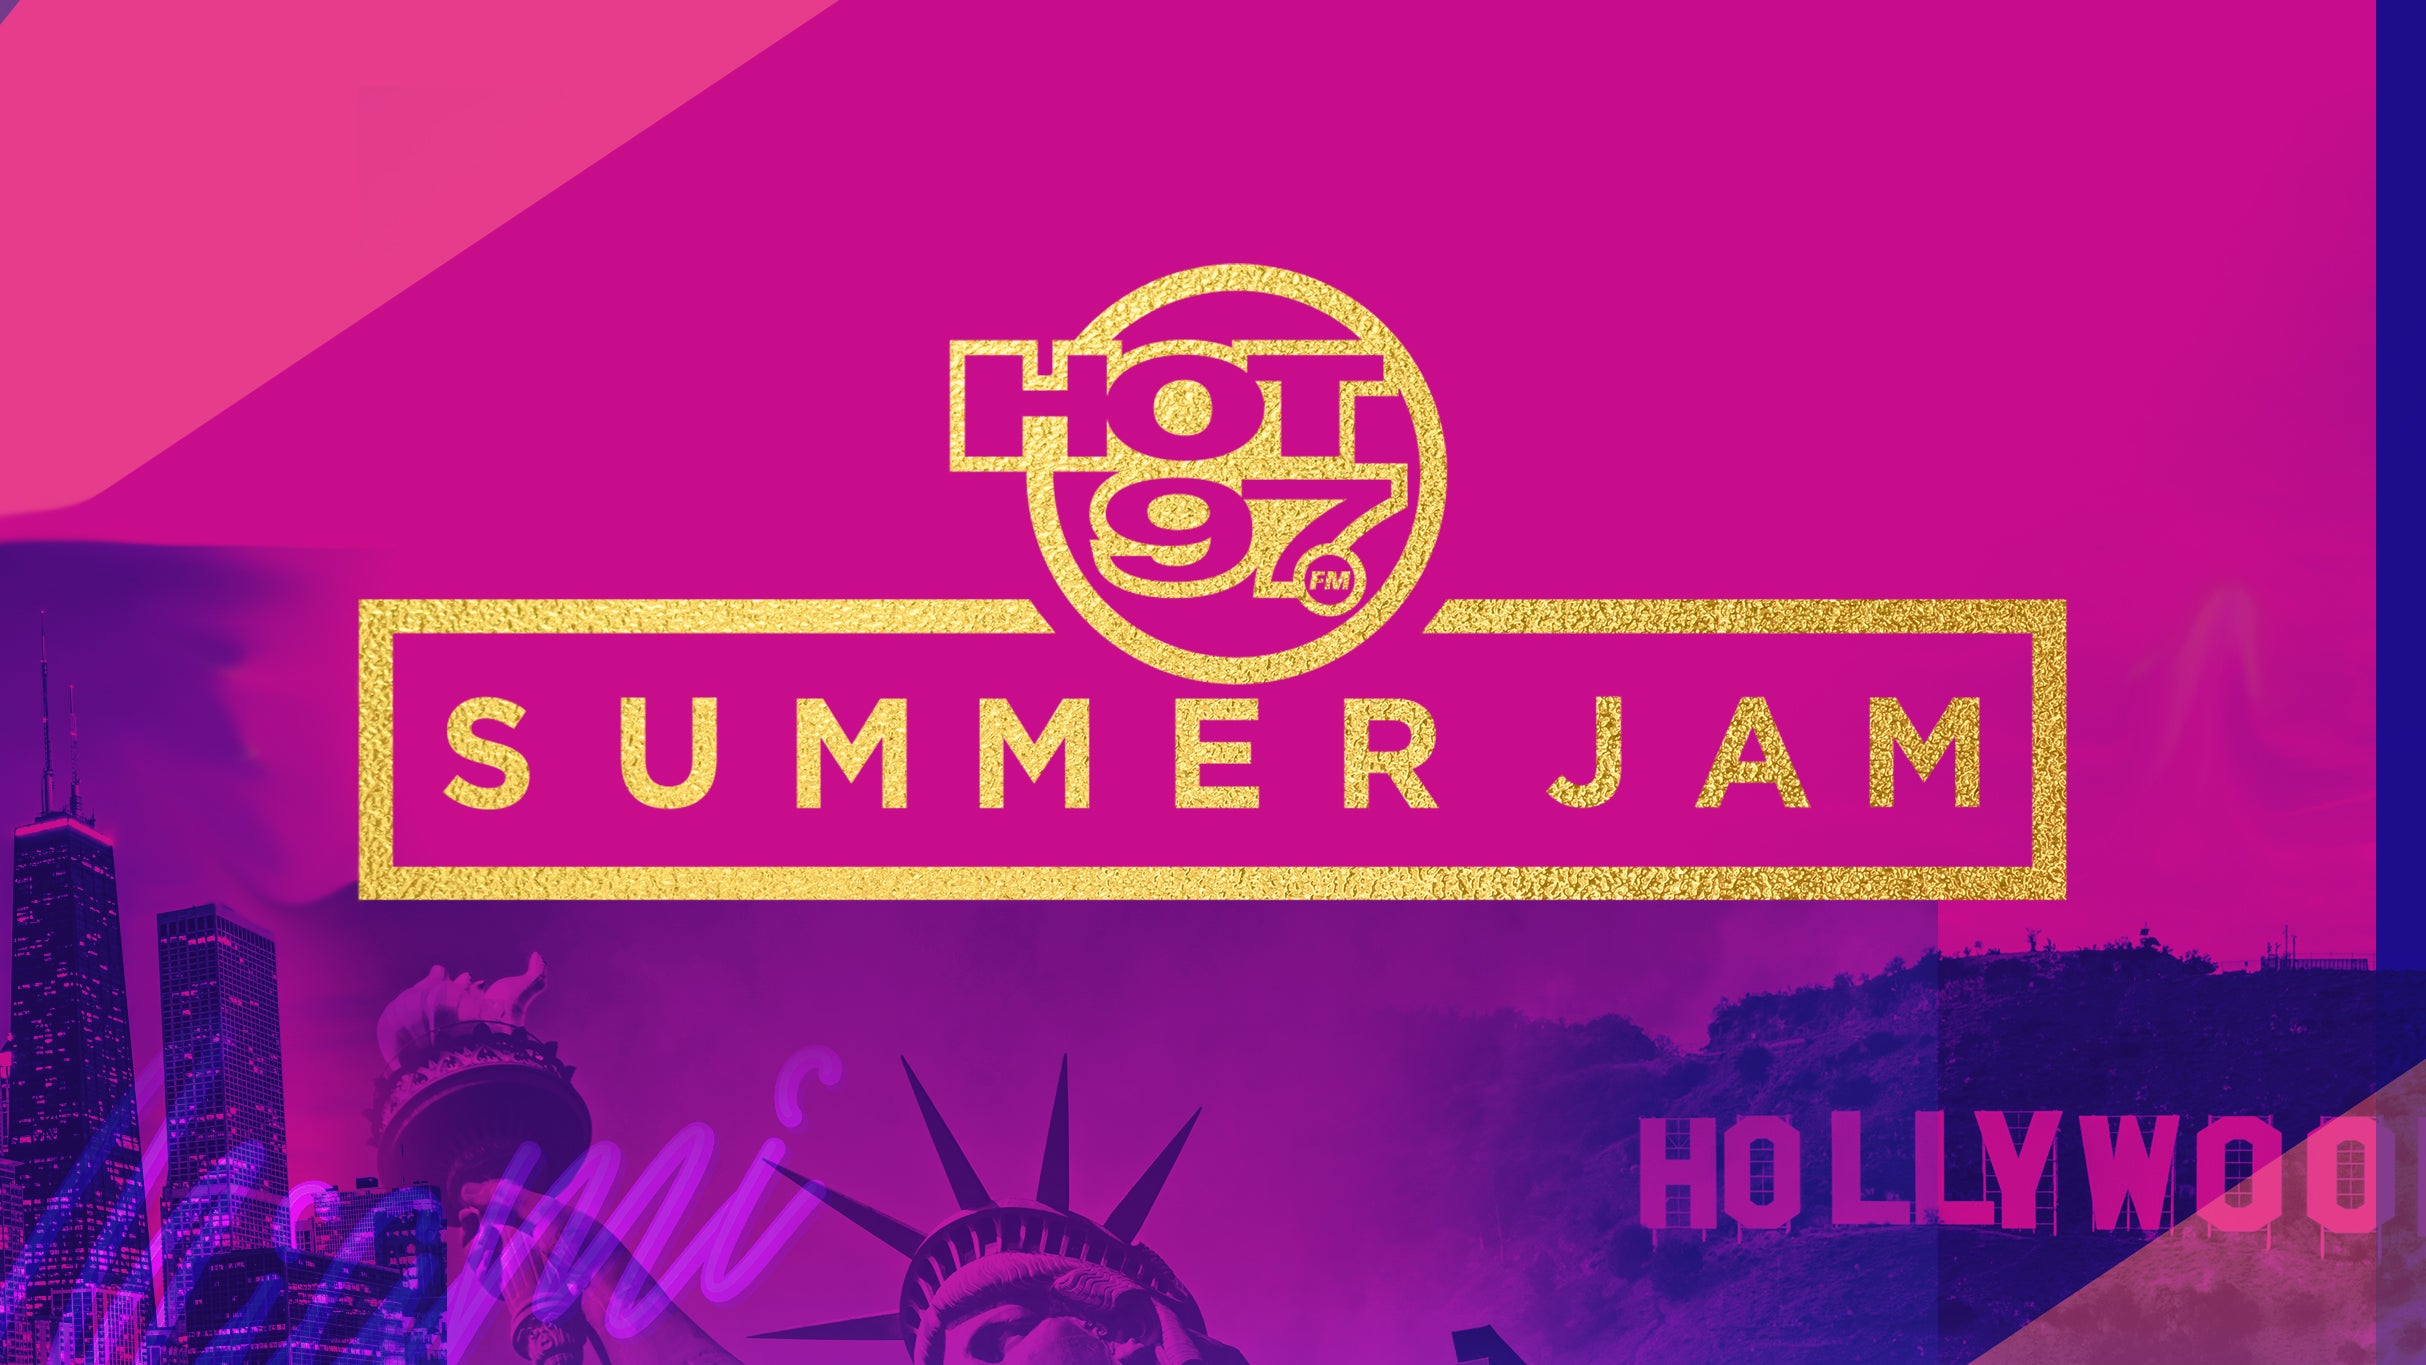 HOT 97 Summer Jam in East Rutherford event information